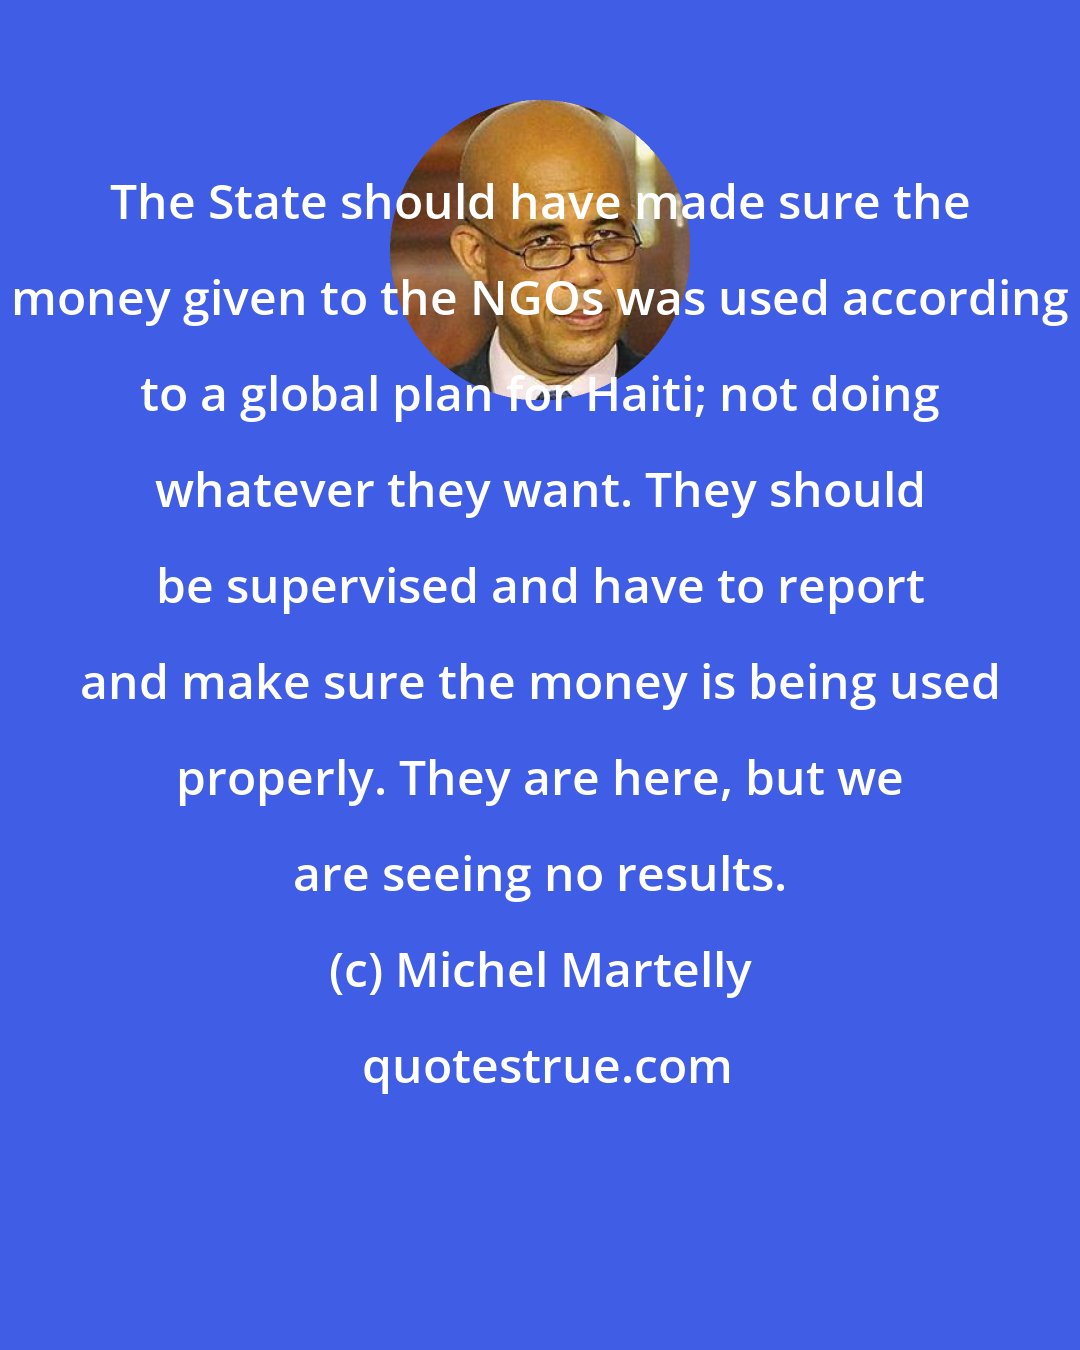 Michel Martelly: The State should have made sure the money given to the NGOs was used according to a global plan for Haiti; not doing whatever they want. They should be supervised and have to report and make sure the money is being used properly. They are here, but we are seeing no results.